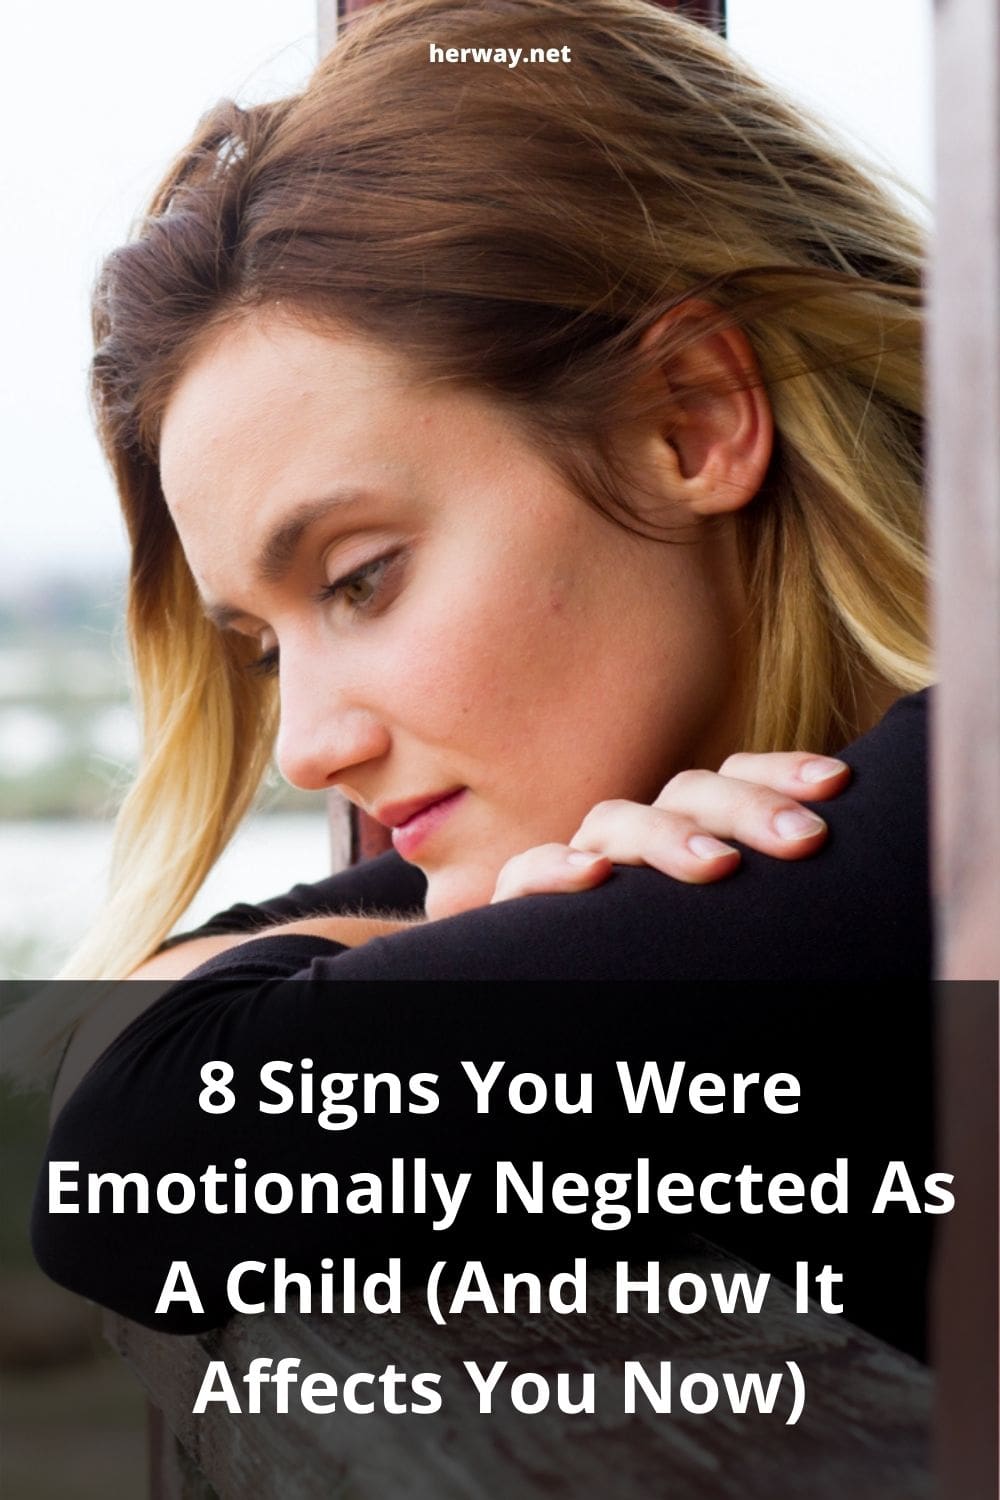 8 Signs You Were Emotionally Neglected As A Child (And How It Affects You Now)